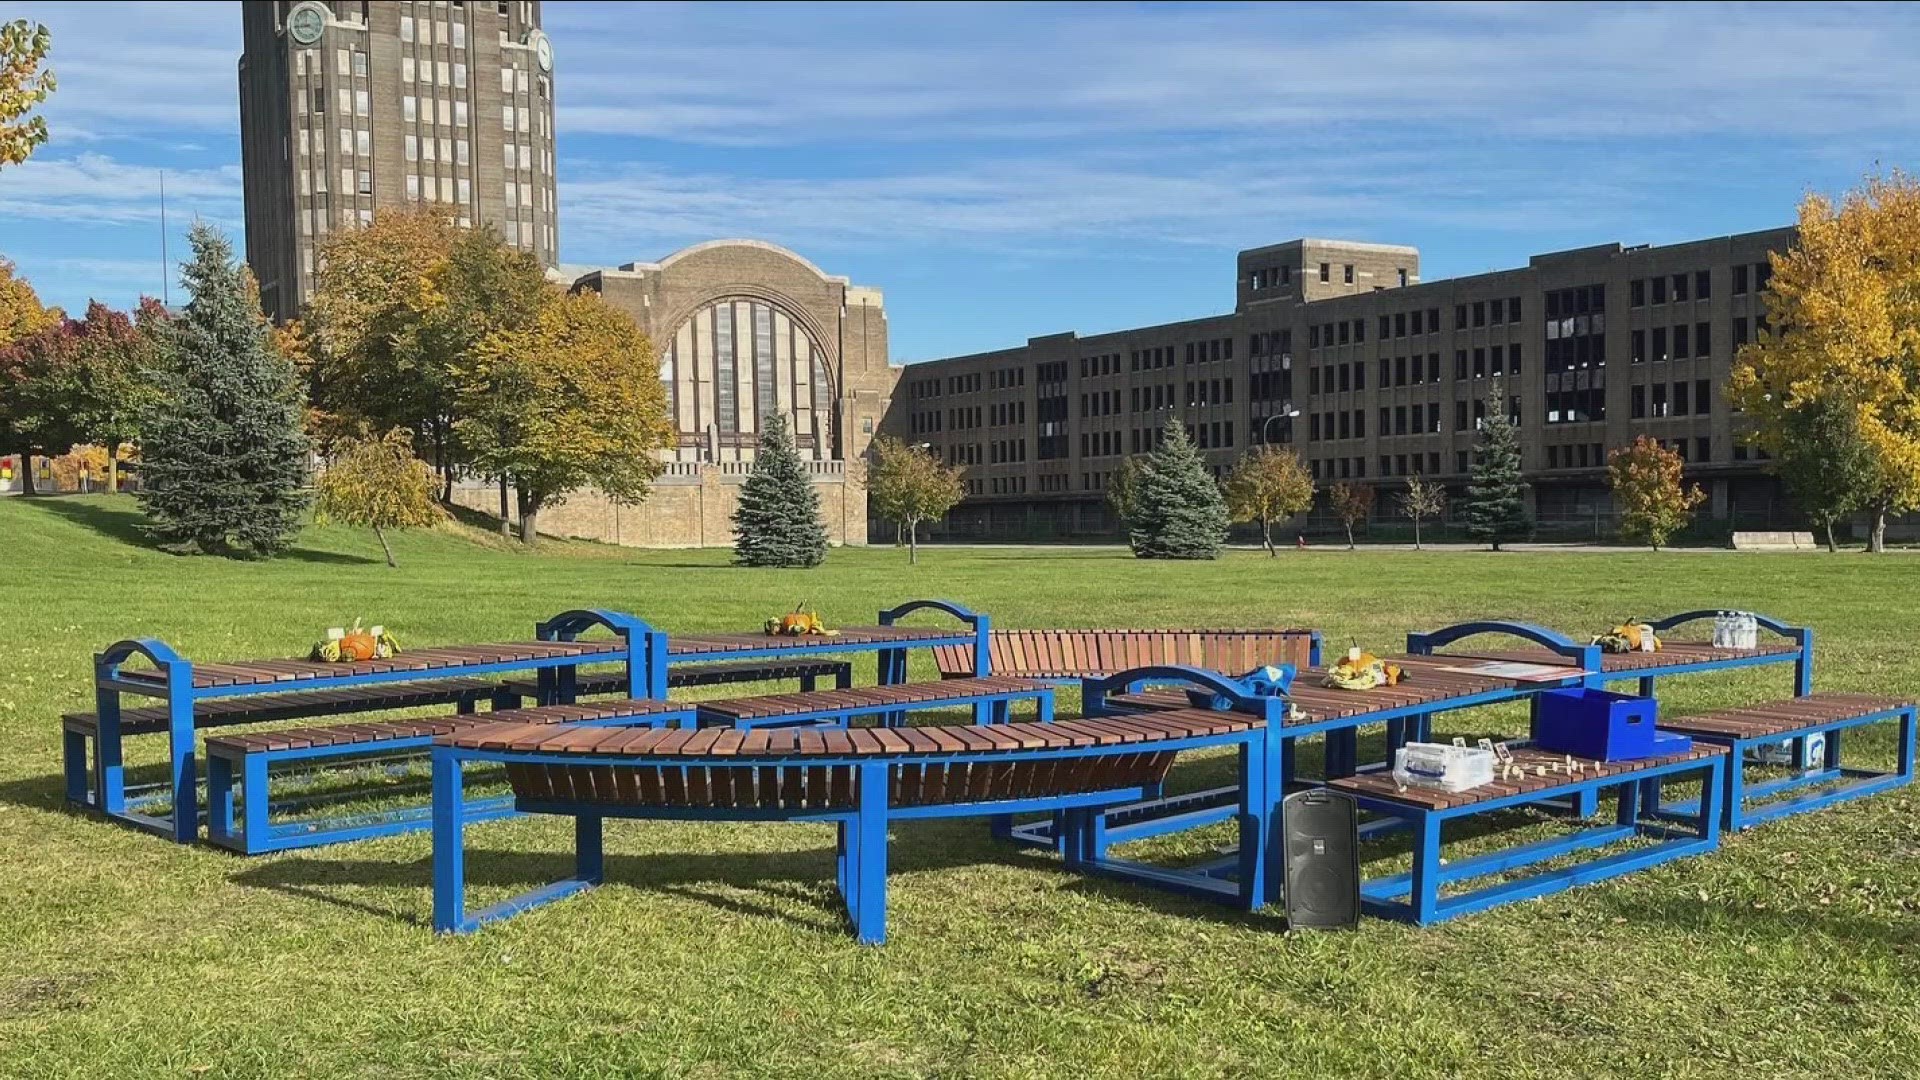 The Foundry will build new benches to put on the lawn with help from Broadview Federal Credit Union